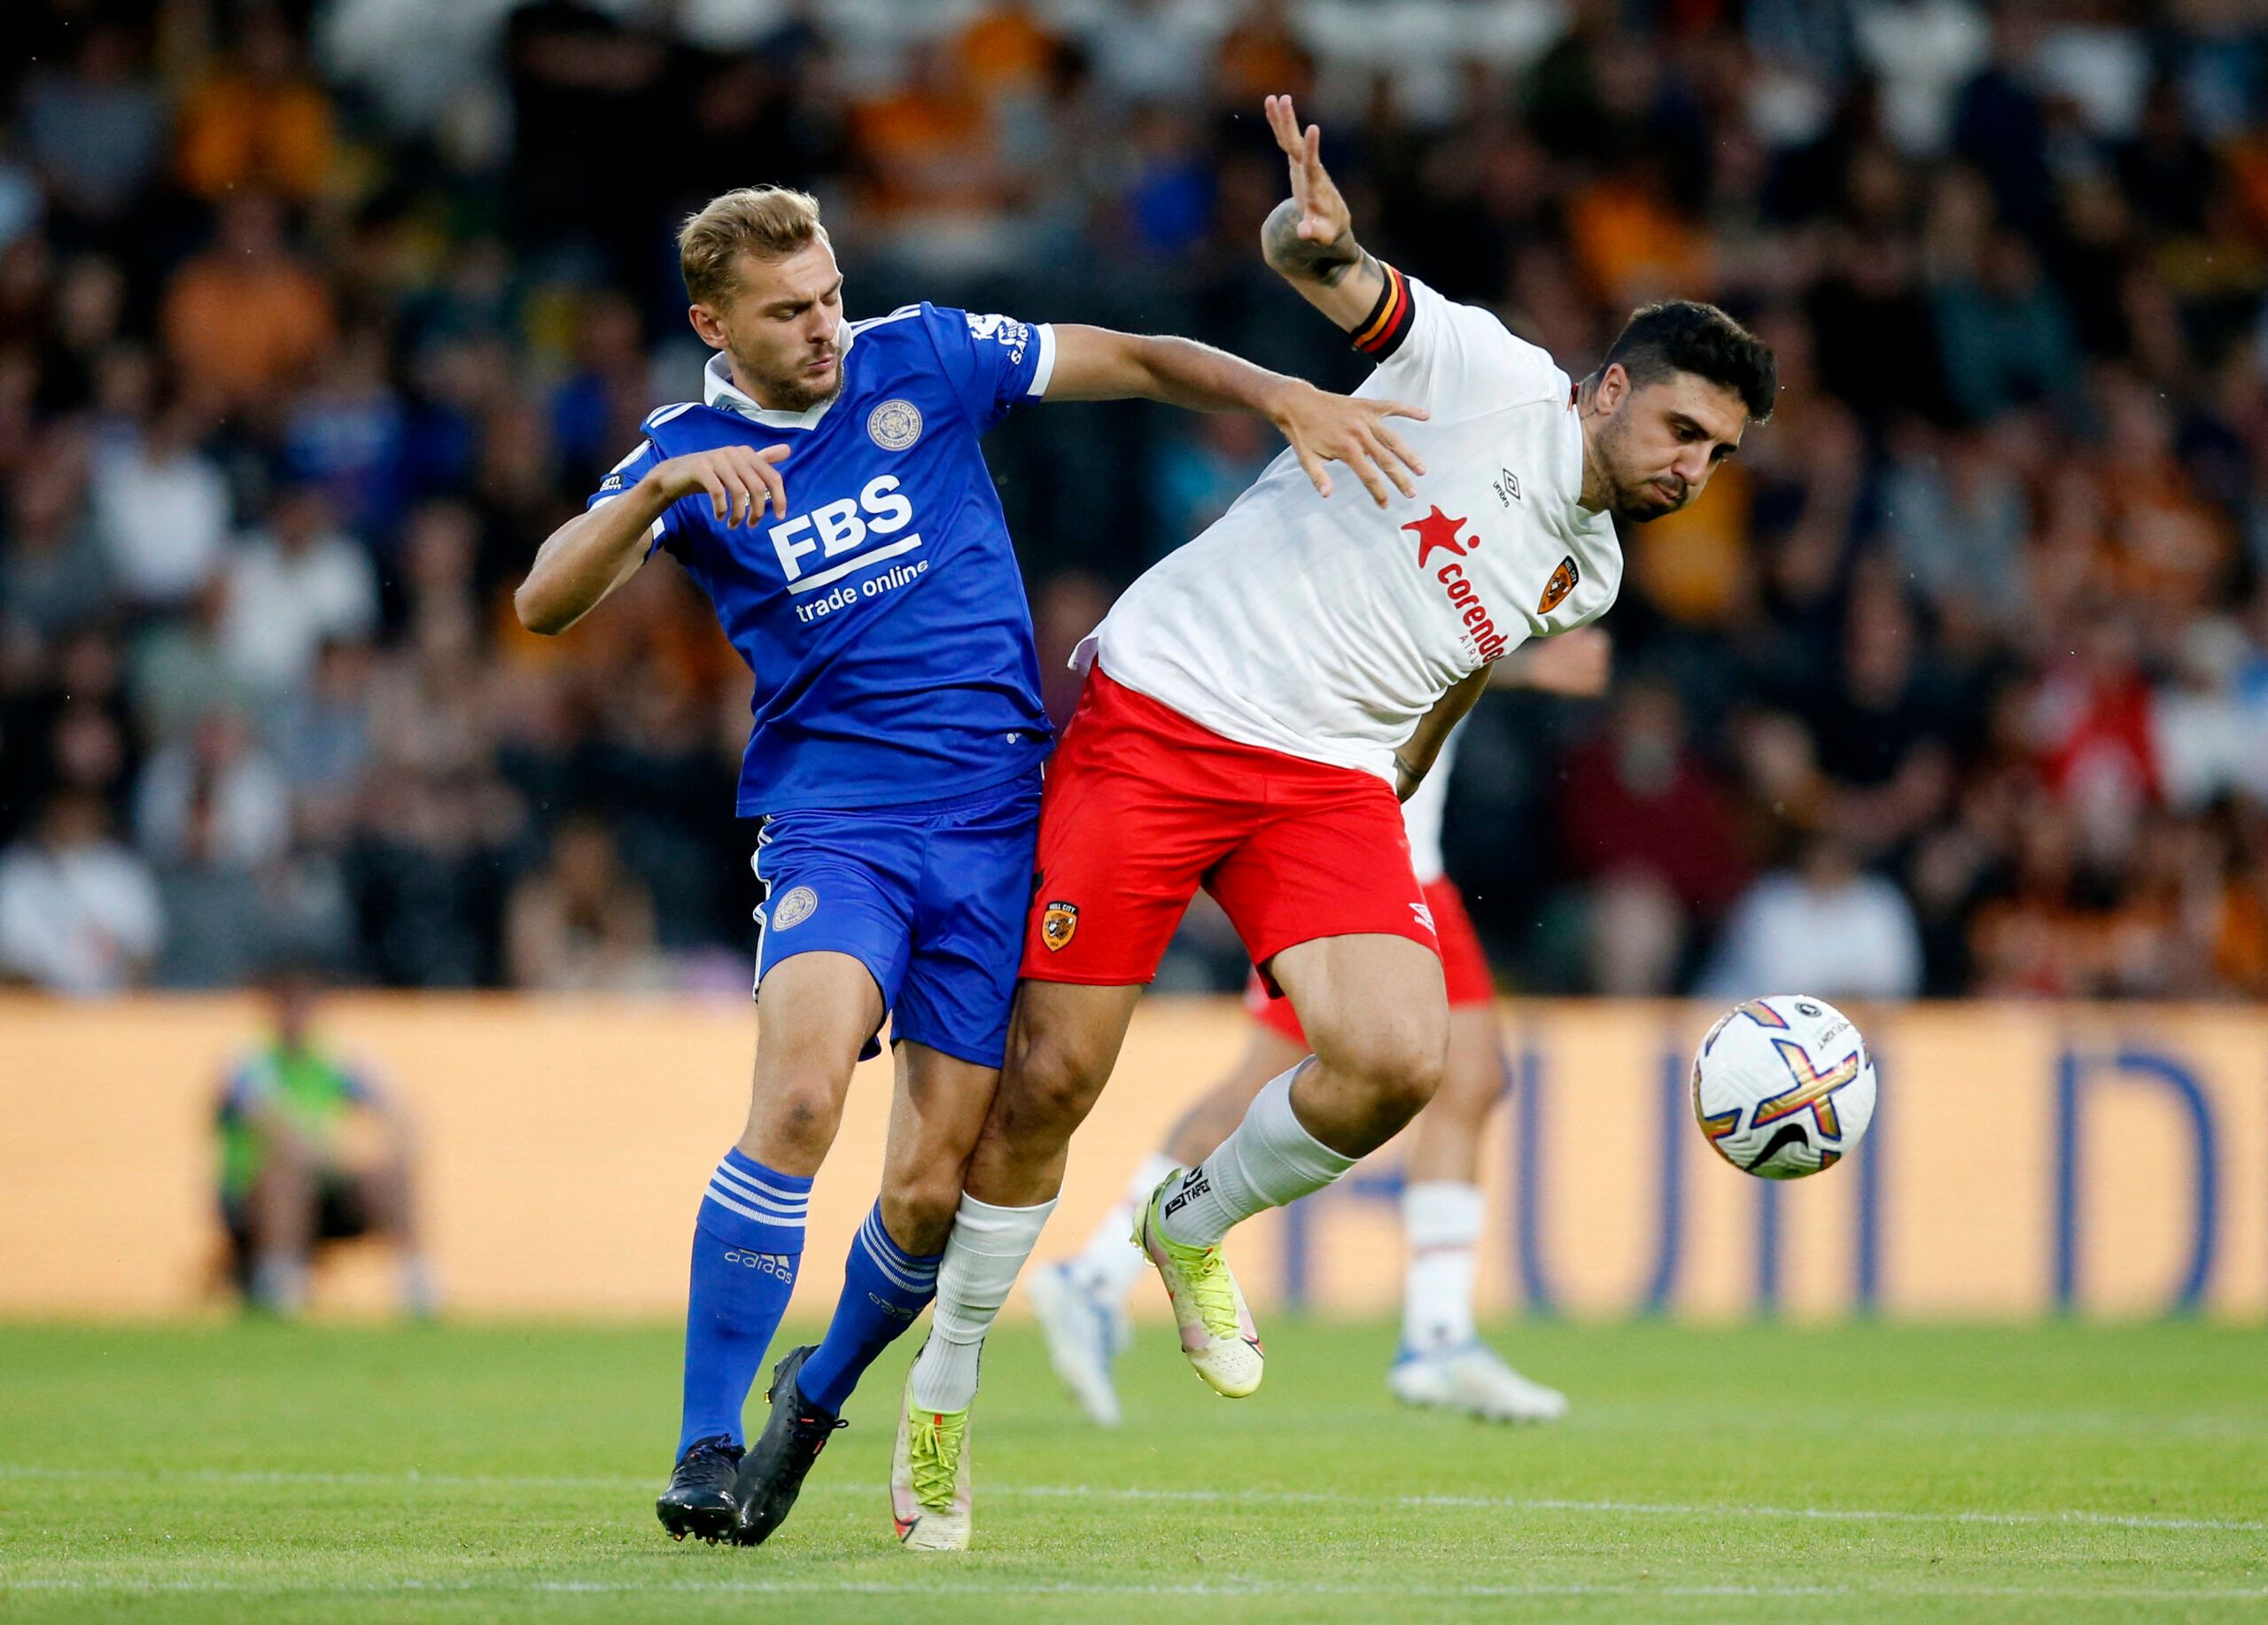 Soccer Football - Pre Season Friendly - Hull City v Leicester City - MKM Stadium, Hull, Britain - July 20, 2022 Leicester City's Kiernan Dewsbury-Hall in action with Hull City's Ozan Tufan Action Images via Reuters/Ed Sykes